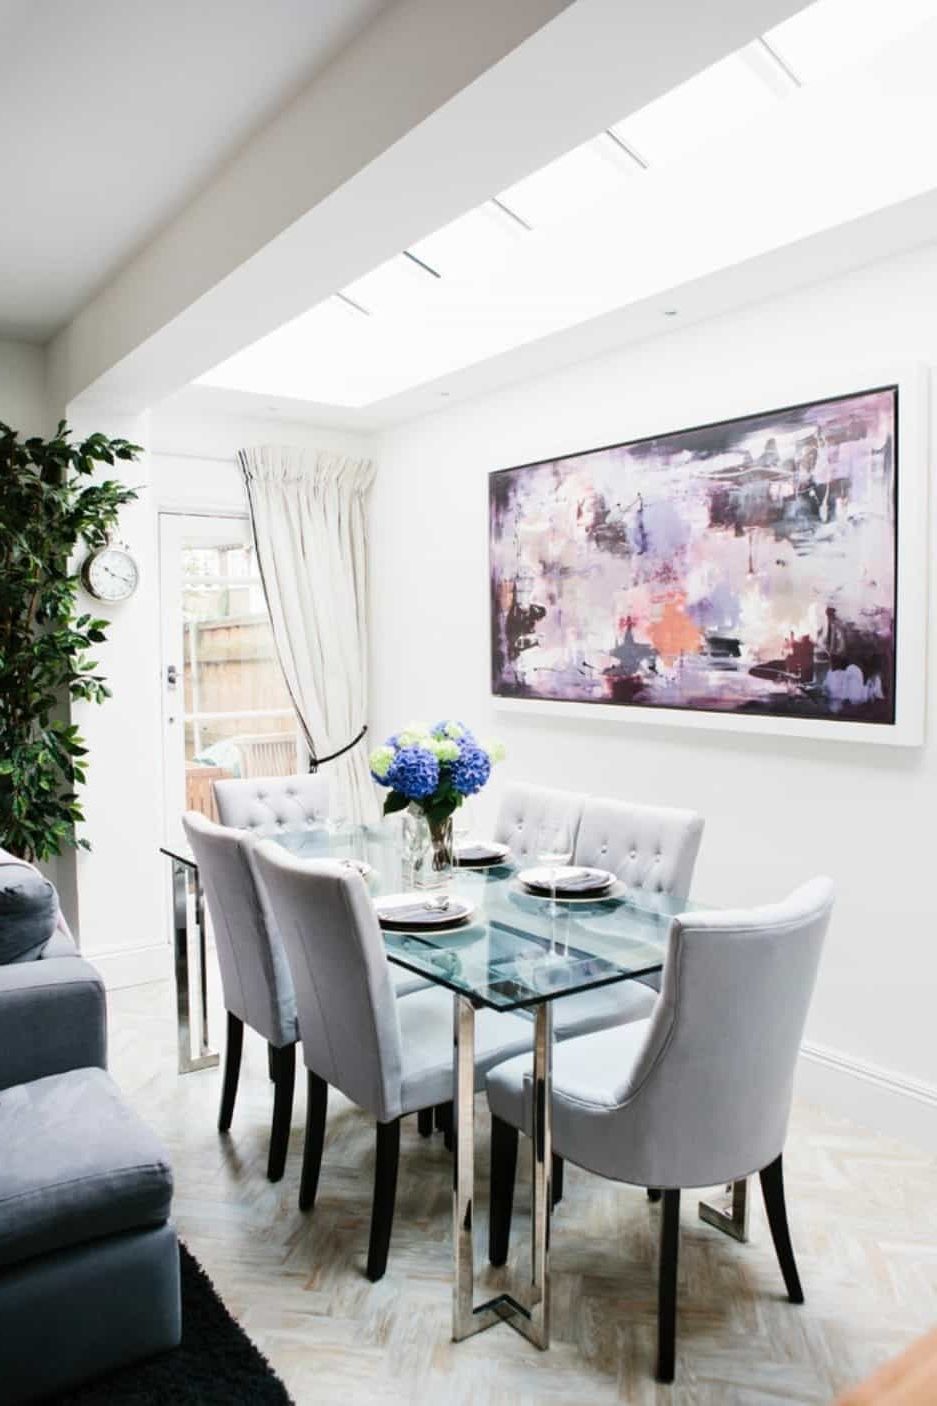 Dining Room With Glass Table And Abstract Wall Art – Cleaning Ways Throughout Most Popular Abstract Wall Art For Dining Room (View 11 of 15)